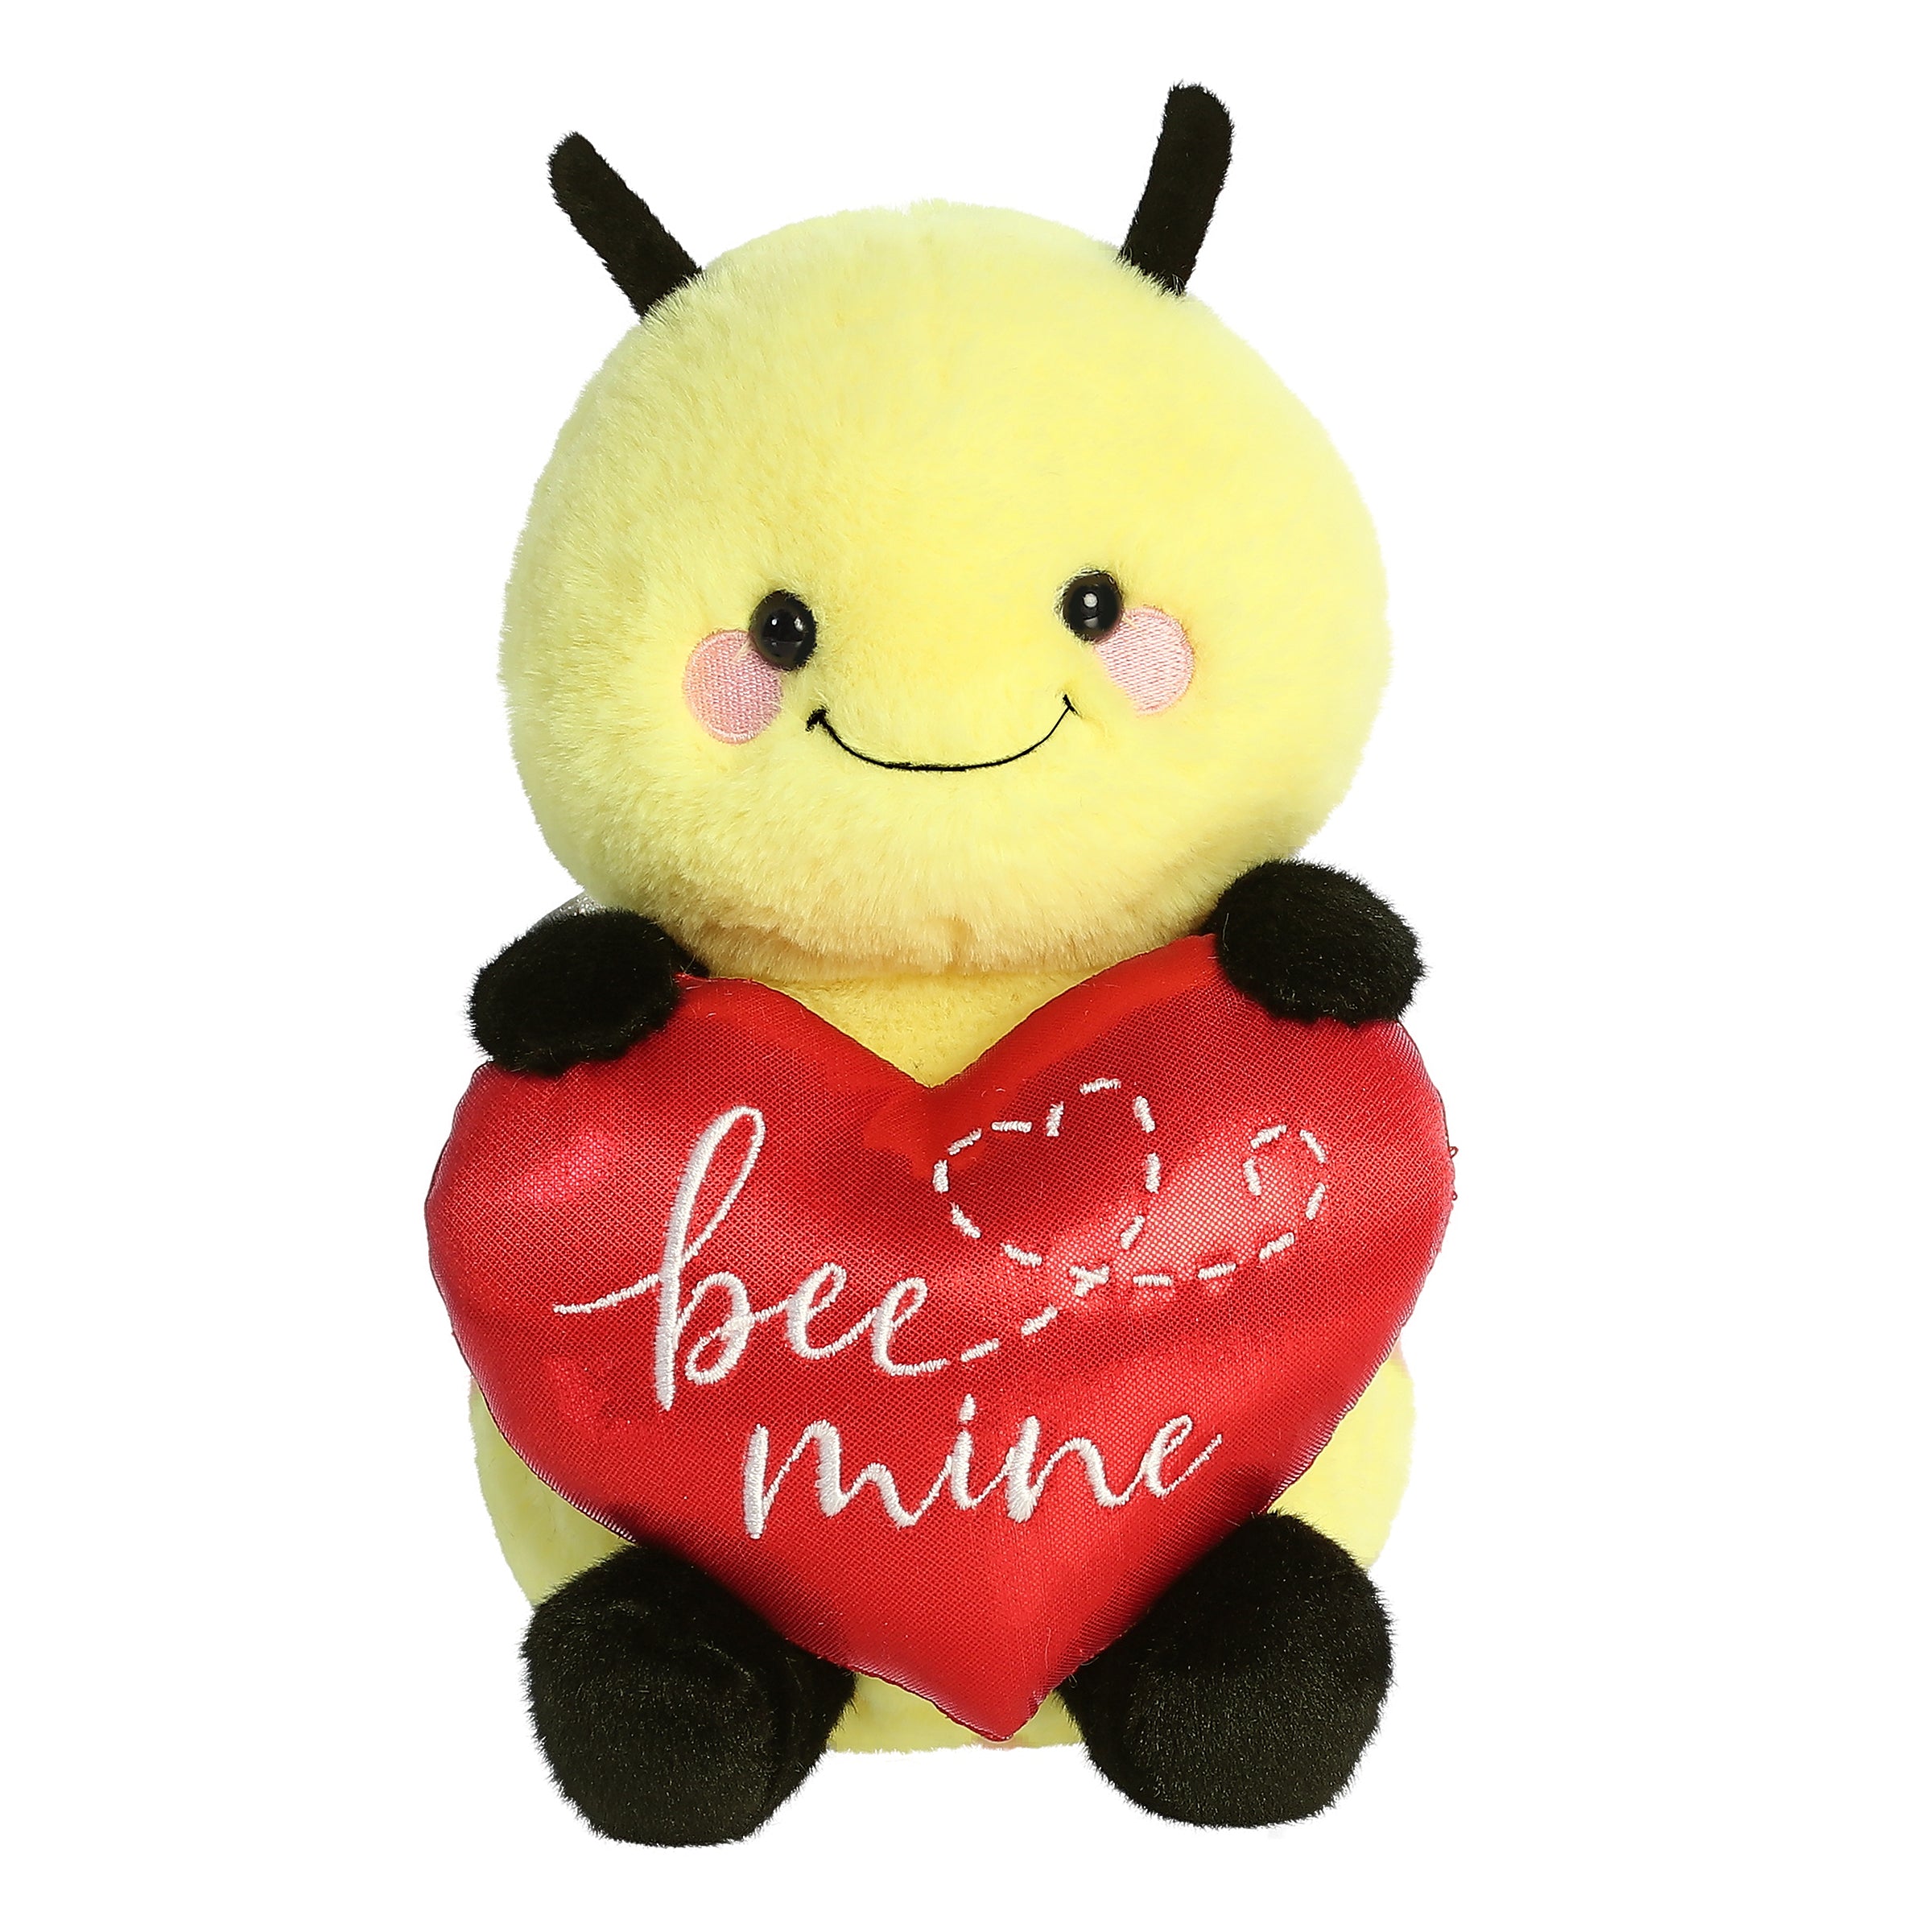 Adorable bee plush with red heart saying "bee mine", a charming addition from Aurora's whimsical Just Sayin' collection.